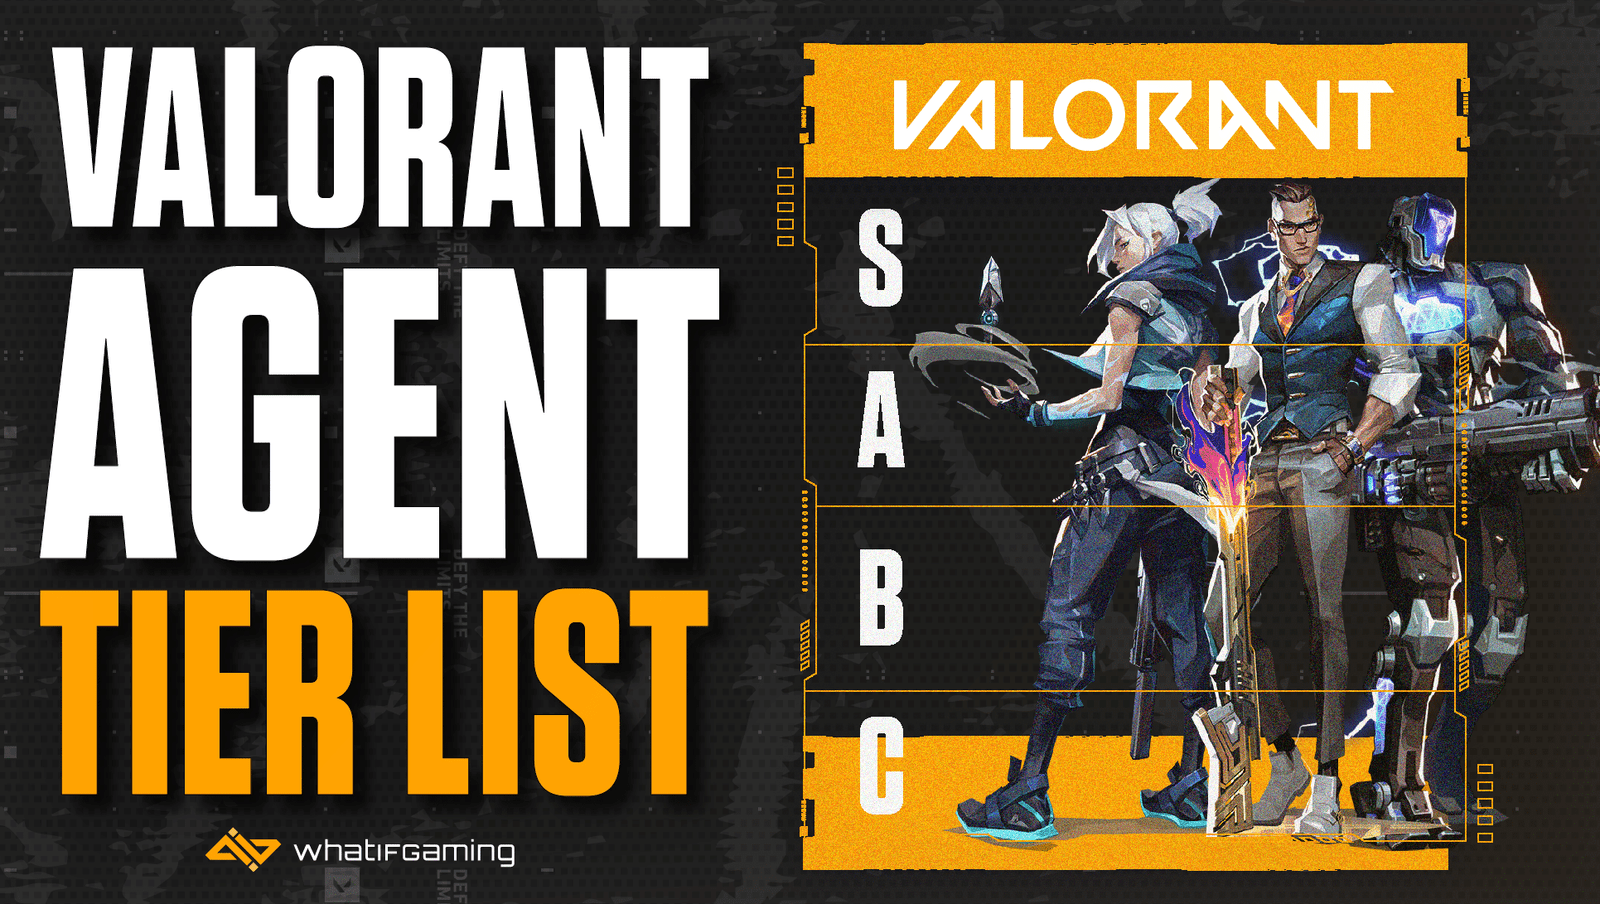 Valorant Deadlock tier list: All maps ranked from best to worst